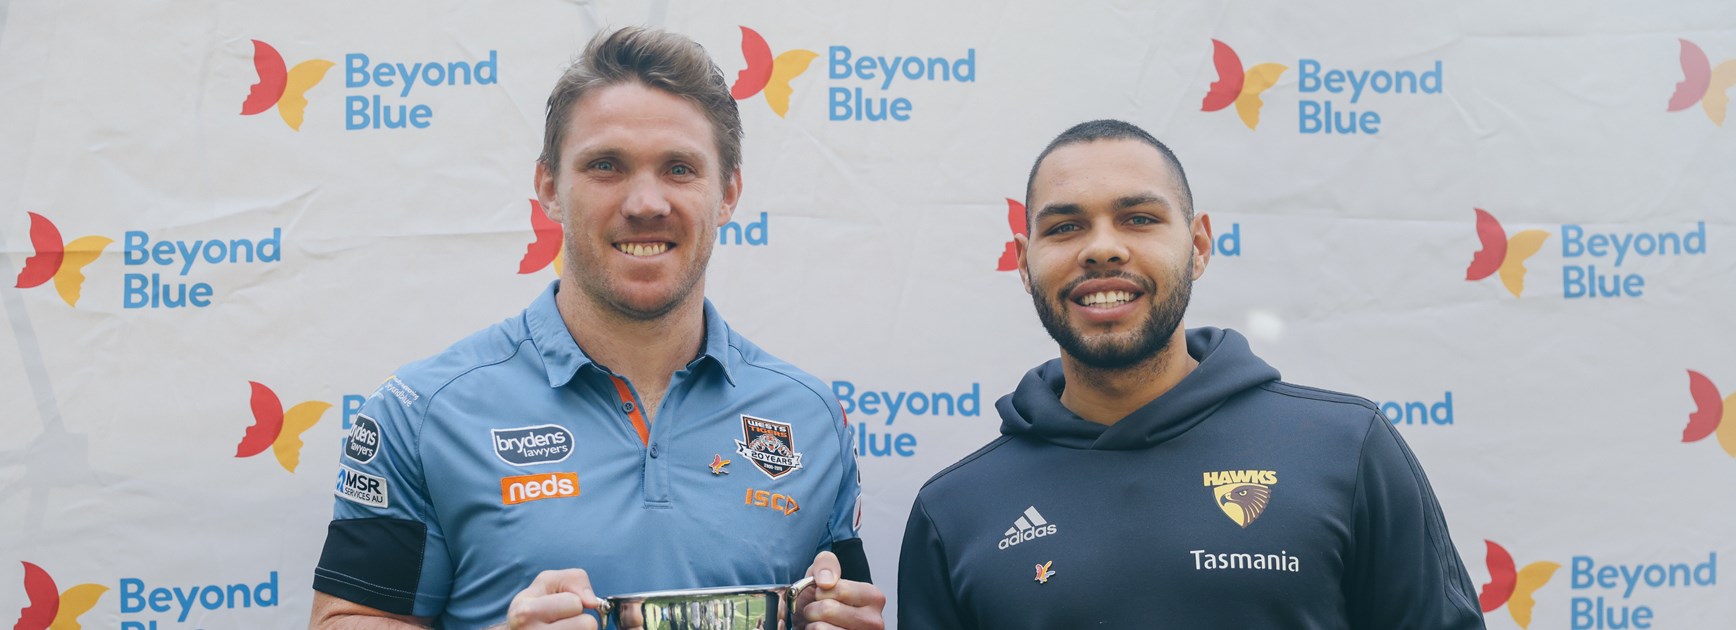 Wests Tigers join with Hawks to promote Beyond Blue Round